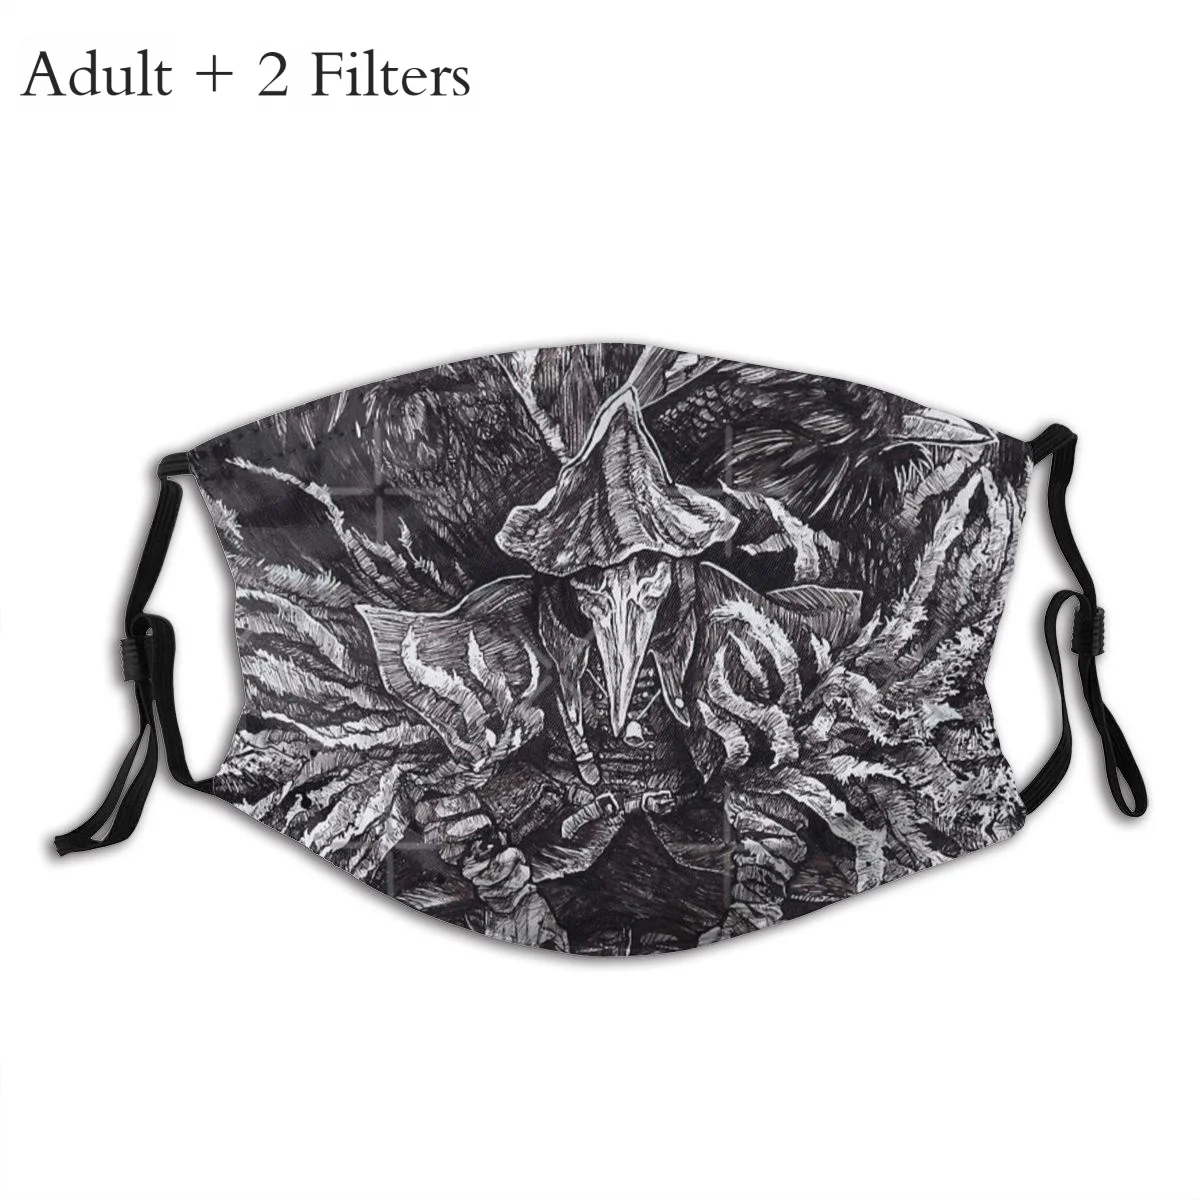 

Eileen The Crow Mouth Face Mask Bloodborne ARPG Game The Myth Of Cthulhu Protection Reusable Washable Masks With Filters